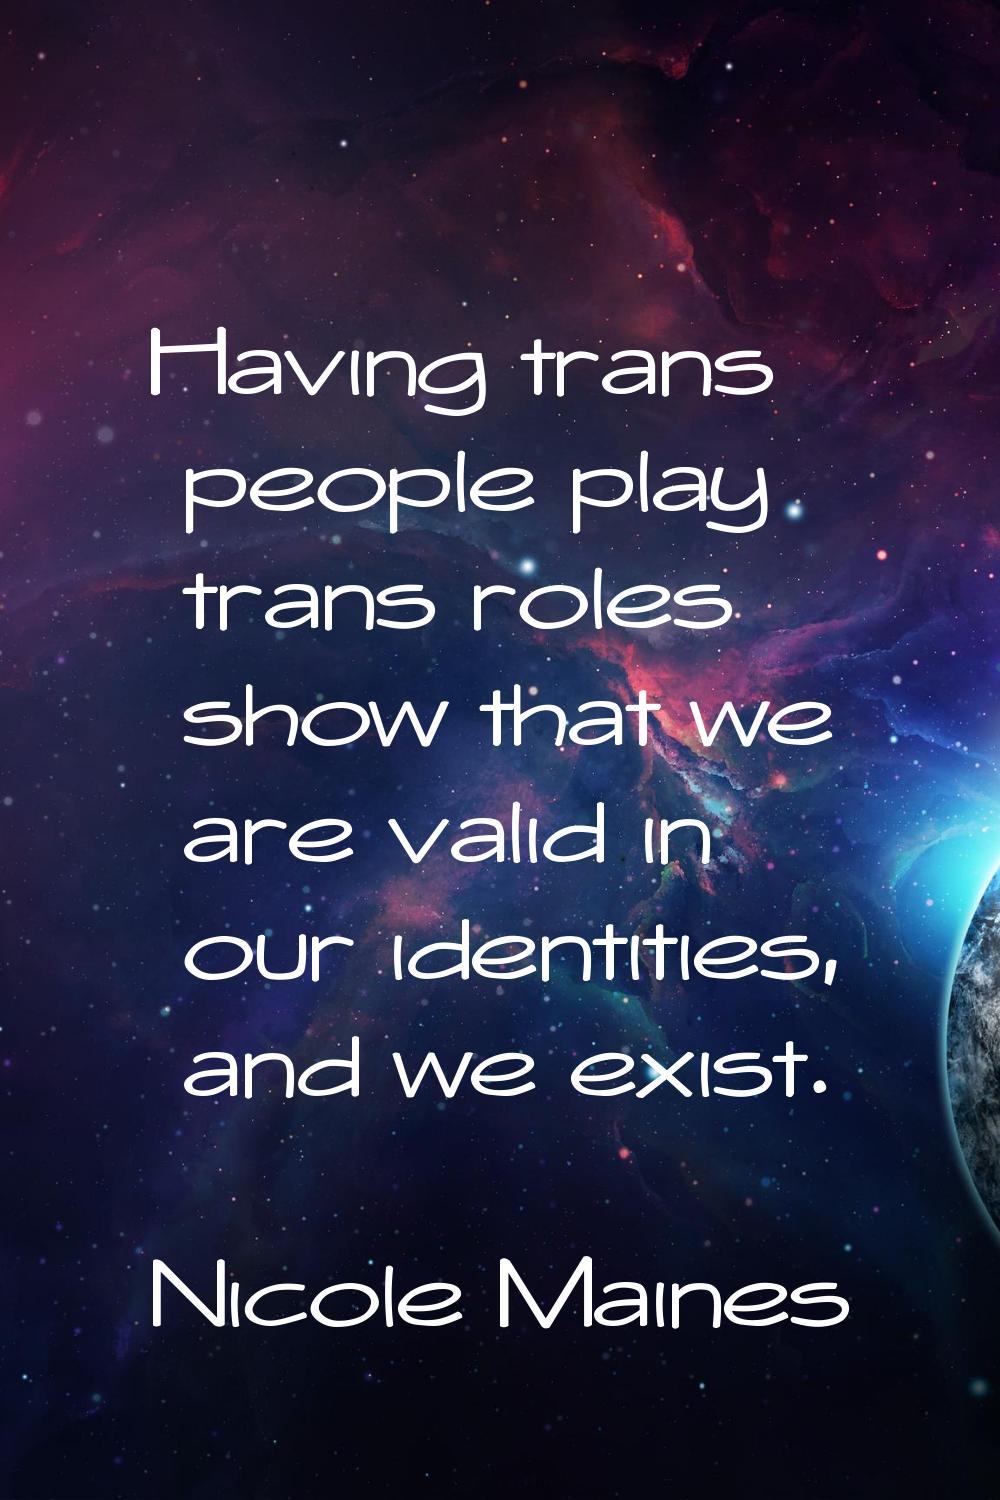 Having trans people play trans roles show that we are valid in our identities, and we exist.